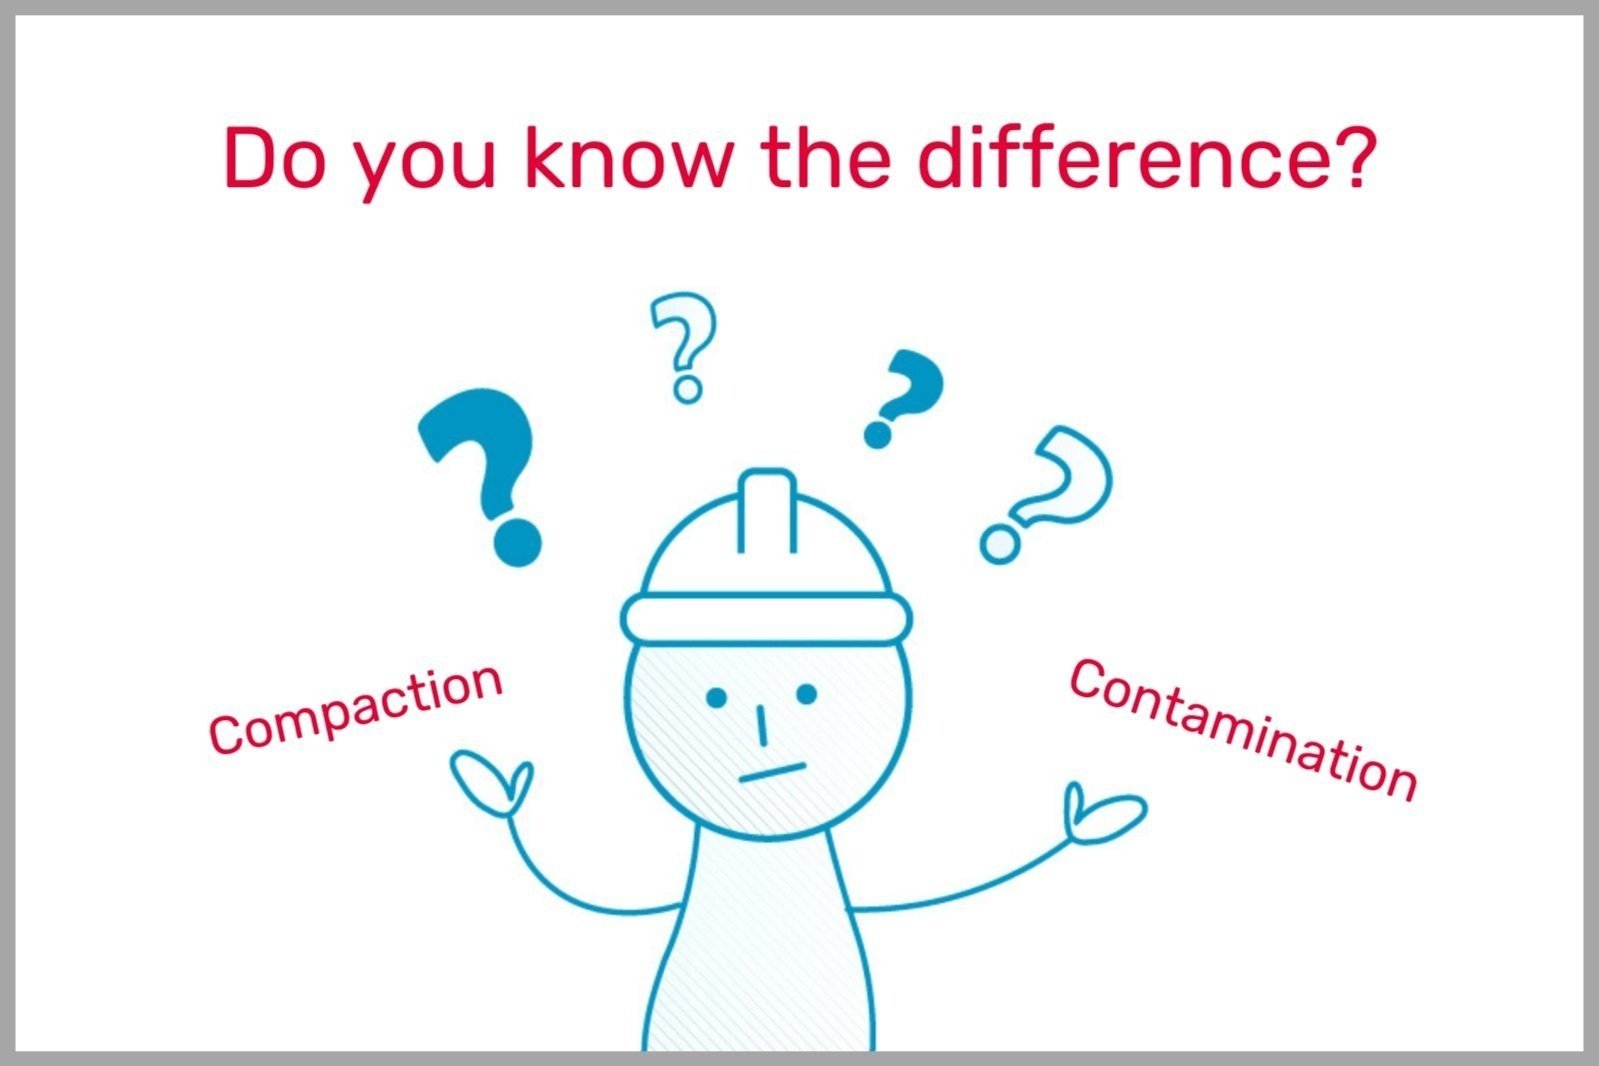 Felt compaction vs contamination: do you know the difference?